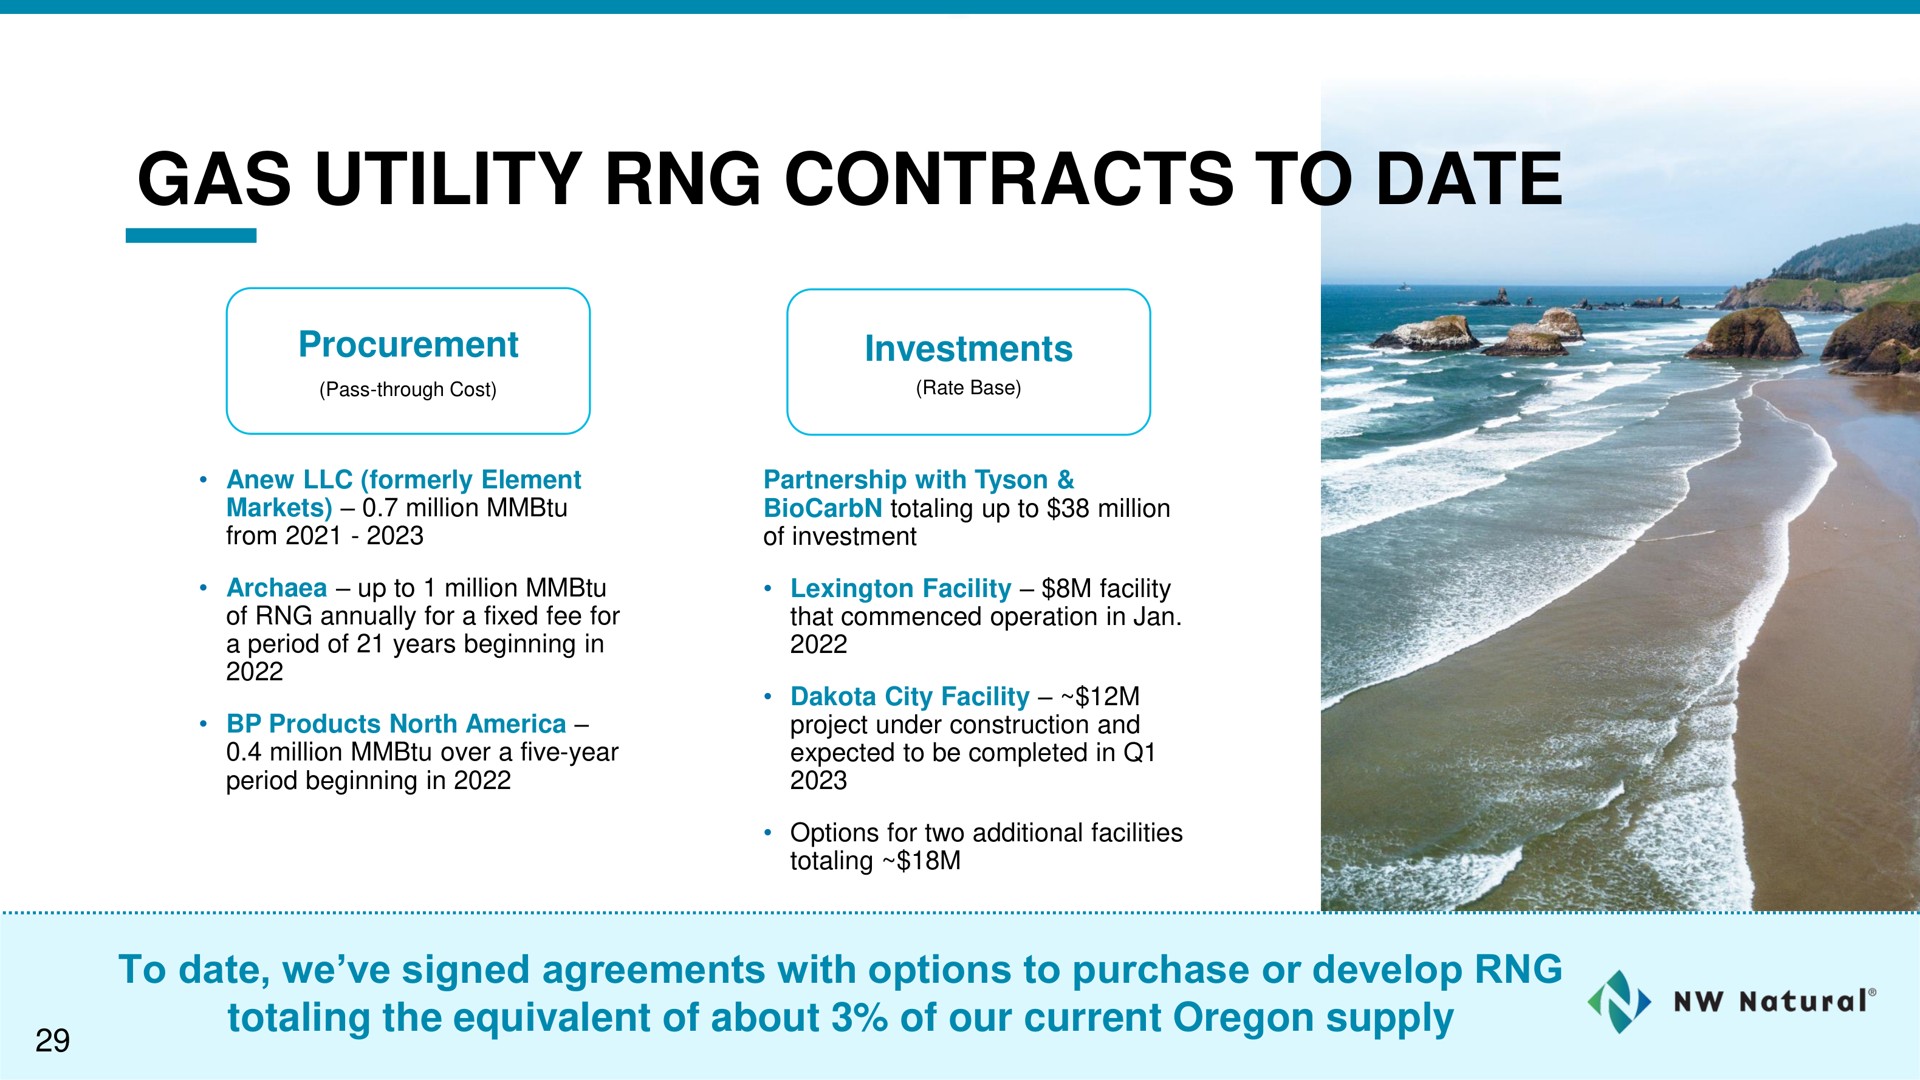 gas utility contracts to date | NW Natural Holdings